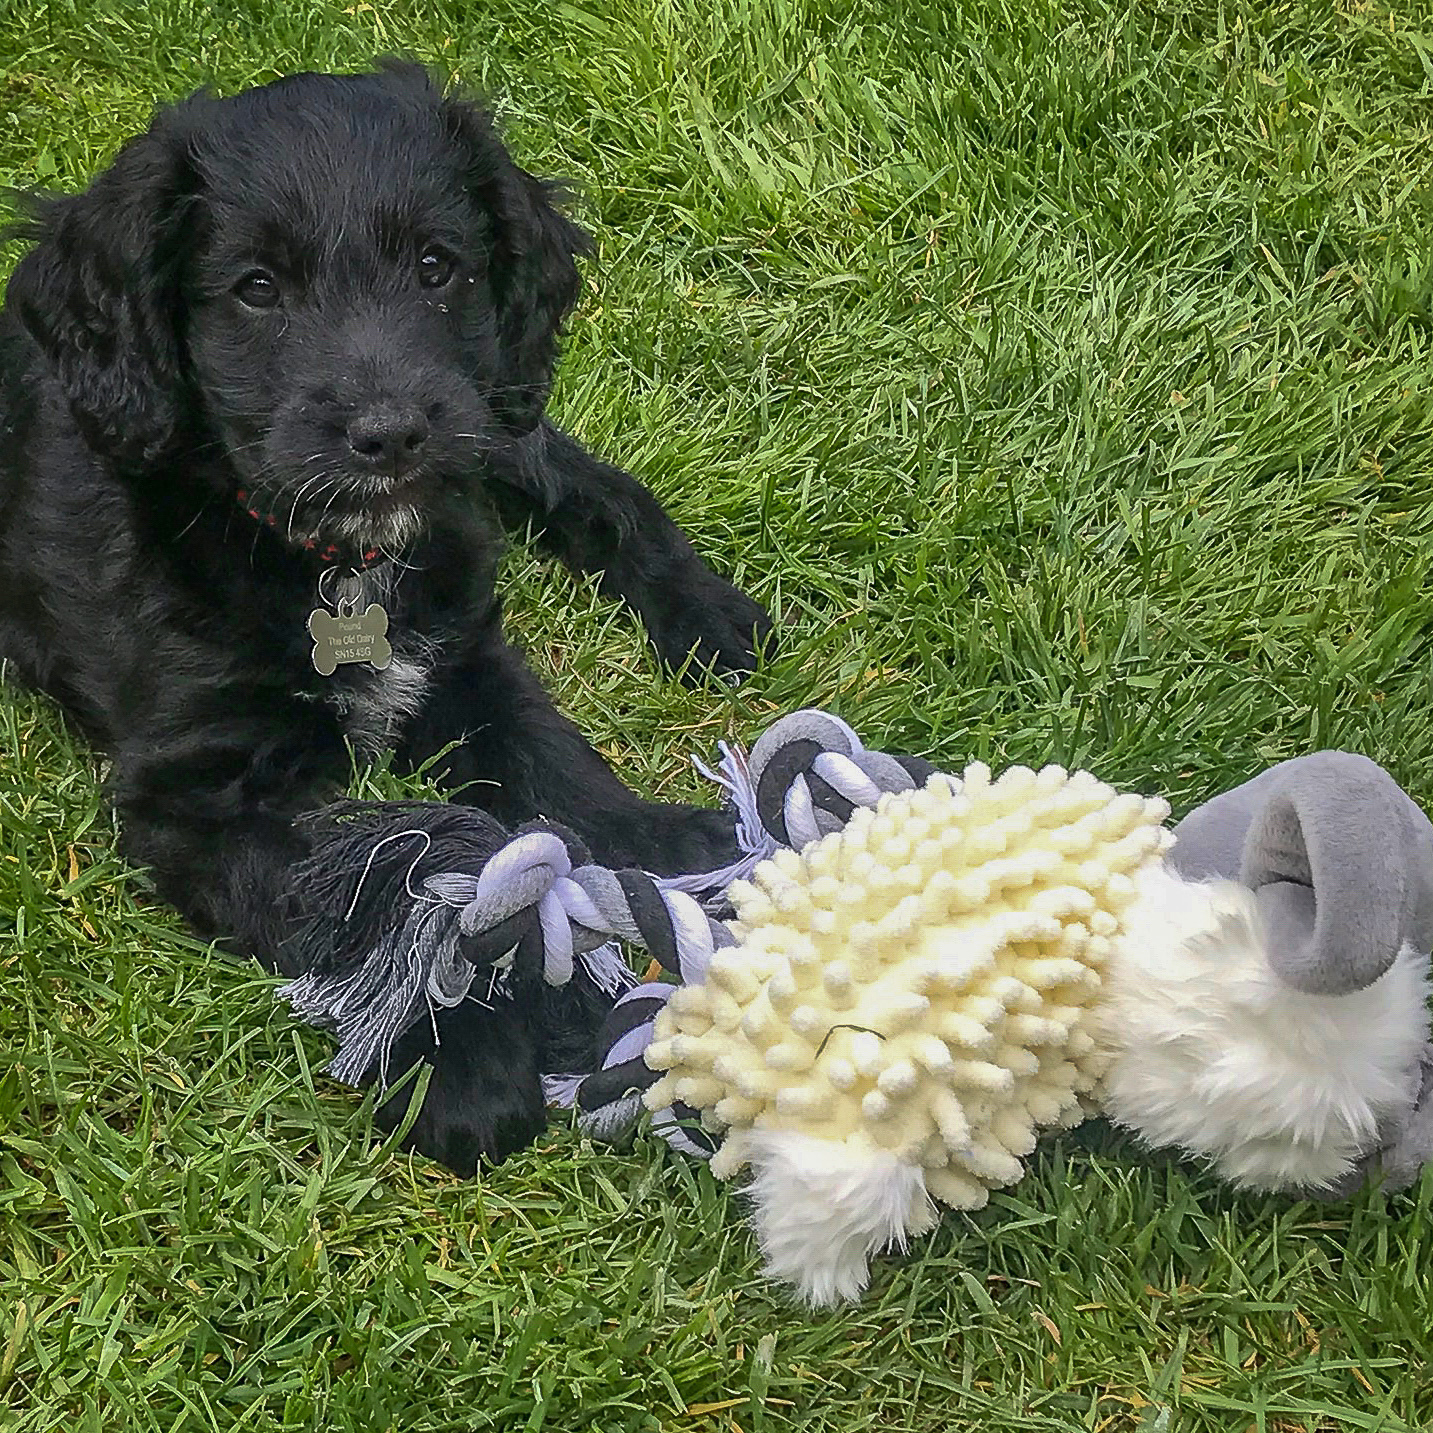 photo of a dog and toy